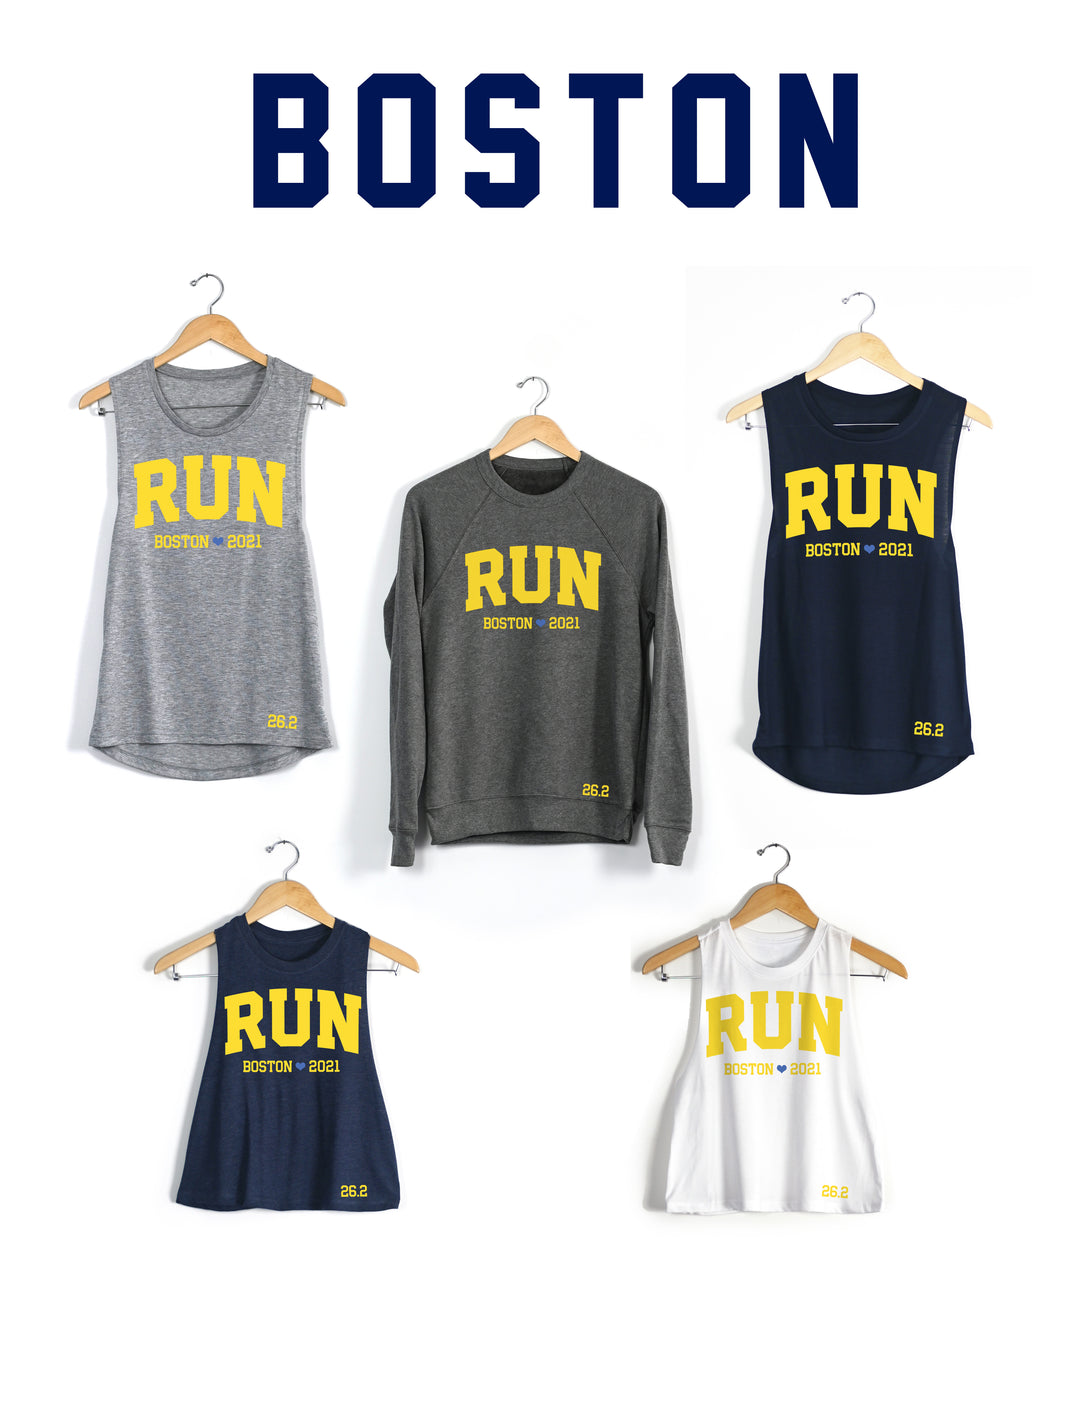 Running Boston: The 2021 Collection